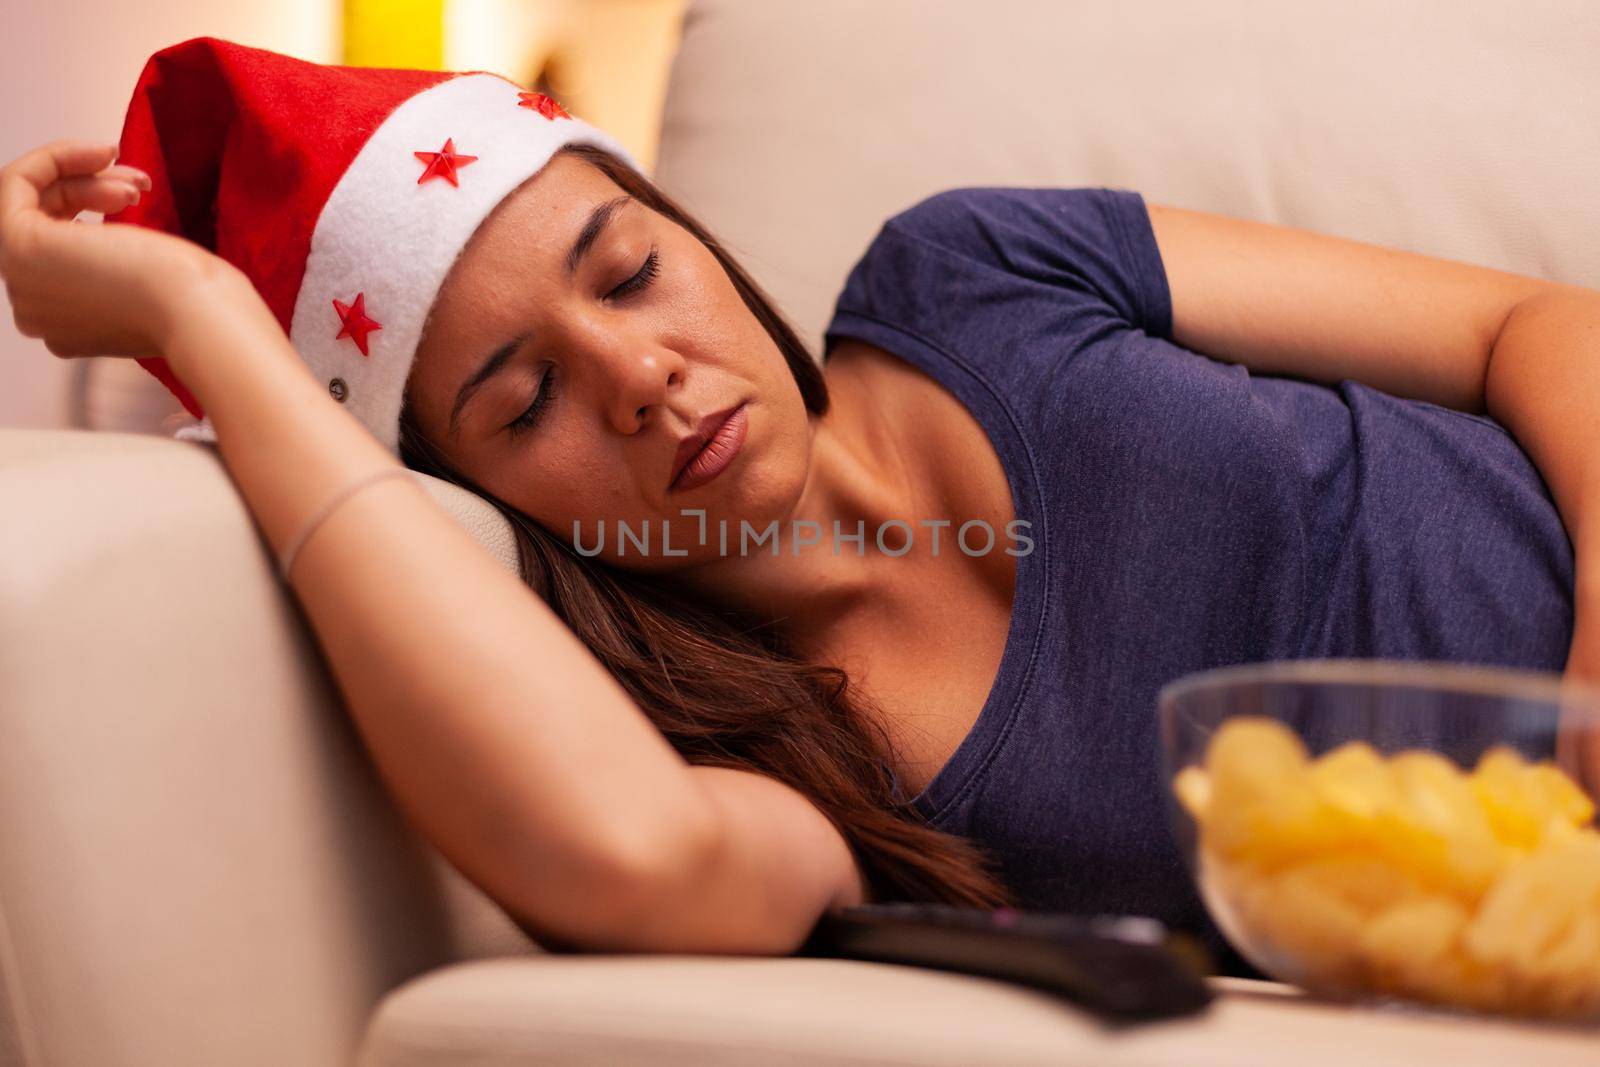 Adult person with santa hat sleeping on sofa after watching december entertainment movie on television in xmas decorated kitchen. Woman celebrating christmas holiday enjoying winter season